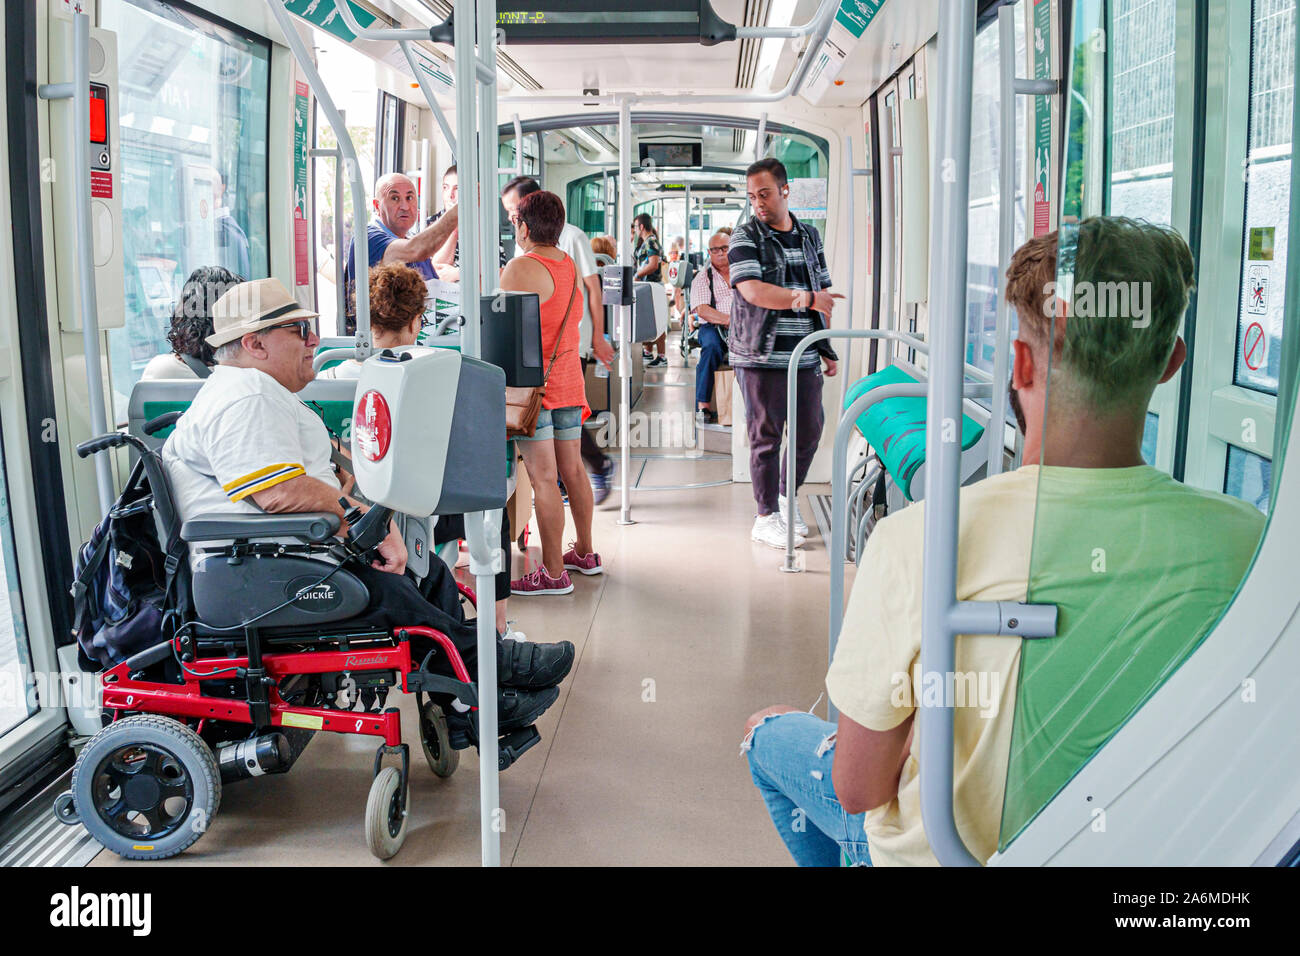 Barcelona Spain,Catalonia Les Corts,tram,exterior,Trambaix,light rail,inside,riders passengers,man,woman,disabled,wheelchair,accessibility,ES190904020 Stock Photo